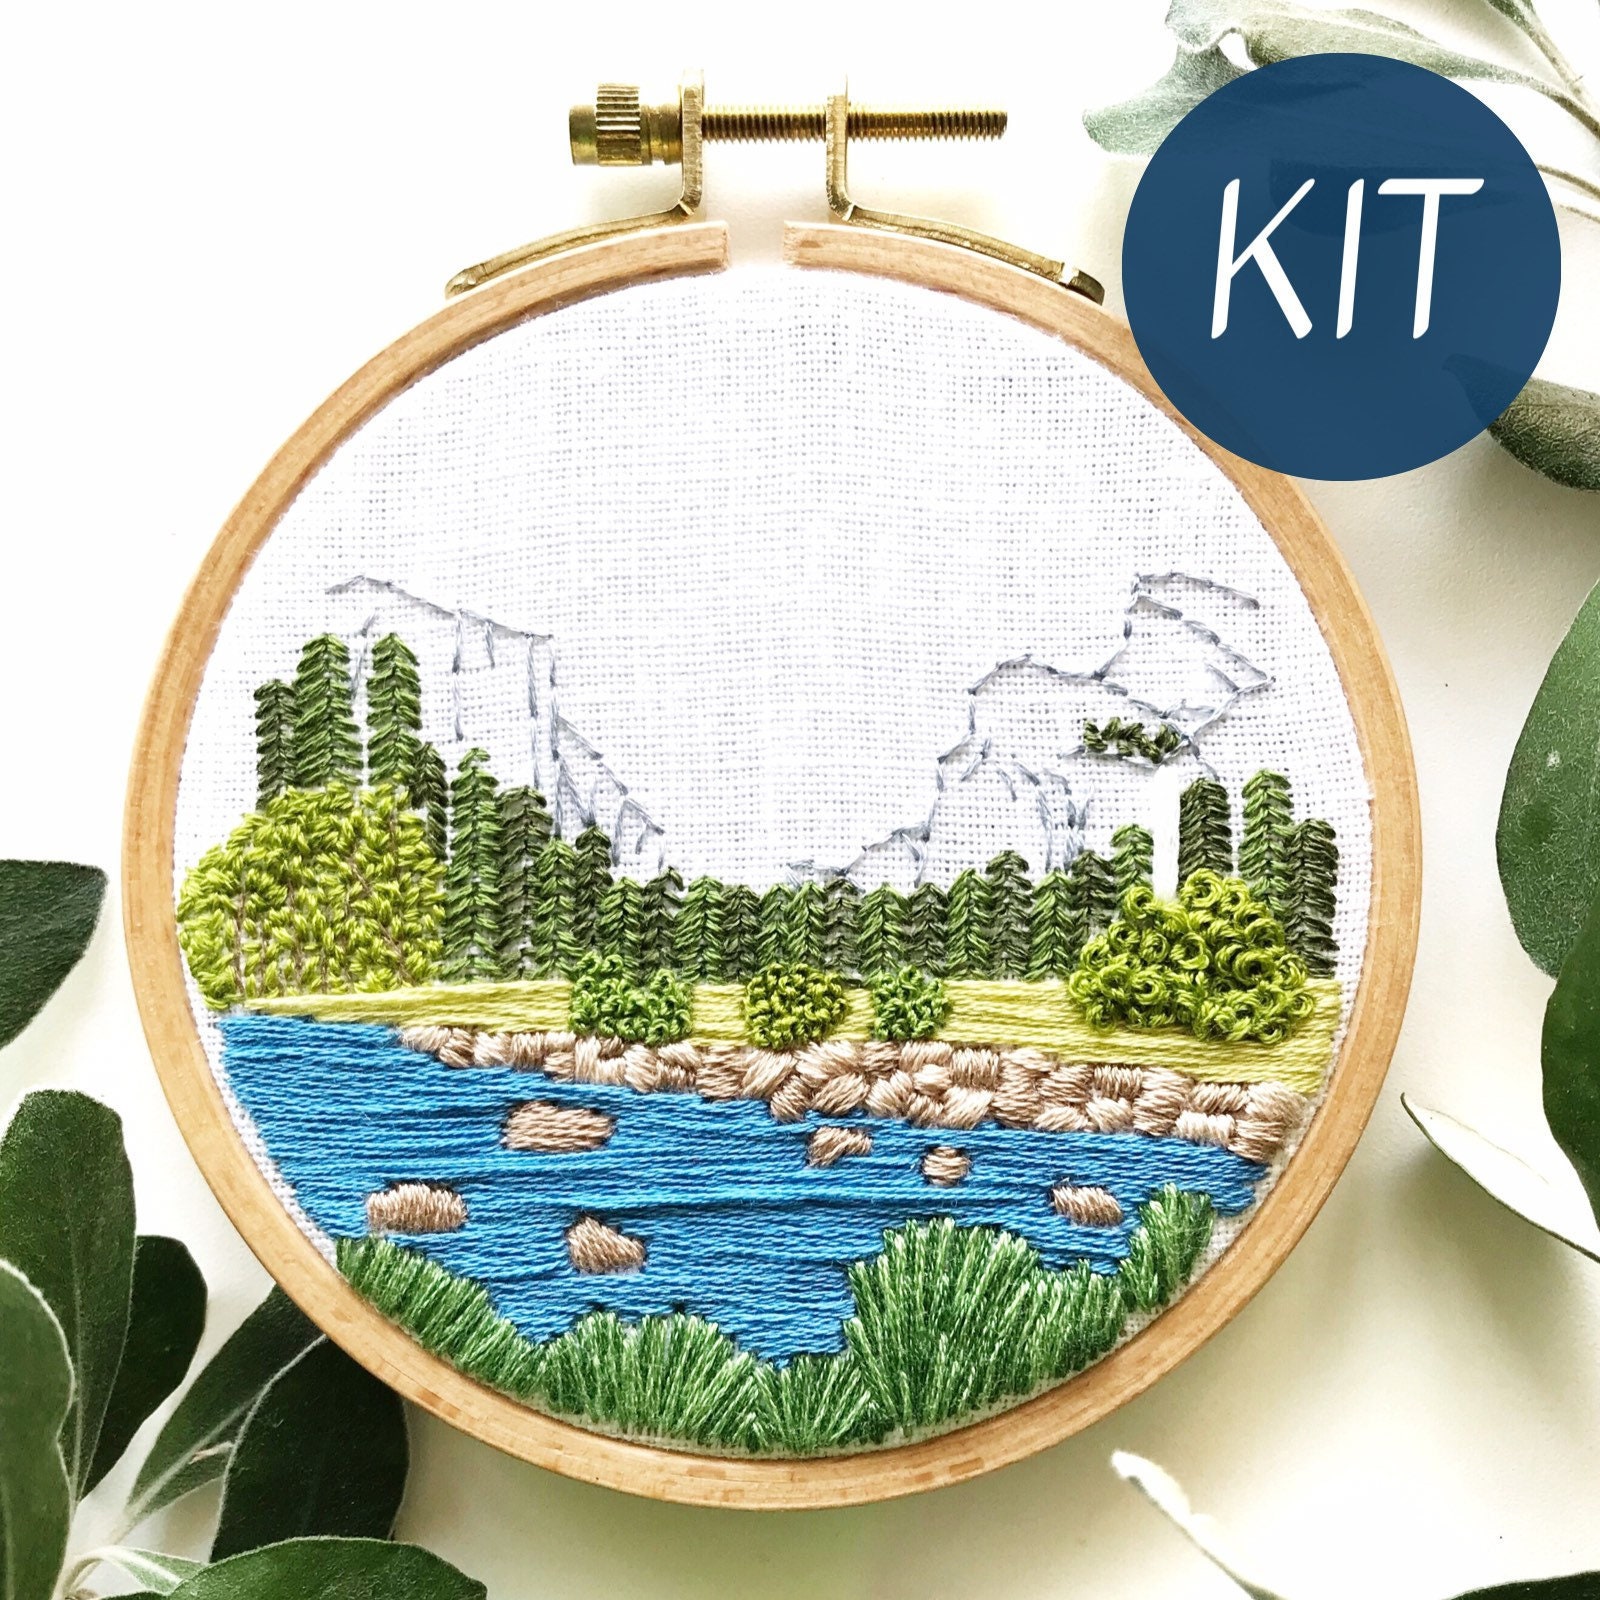 Embroidery Kit for Beginner Modern Crewel Embroidery Kit With Pattern  Embroidery Hoop Plants Full Embroidery DIY KIT Landscape 